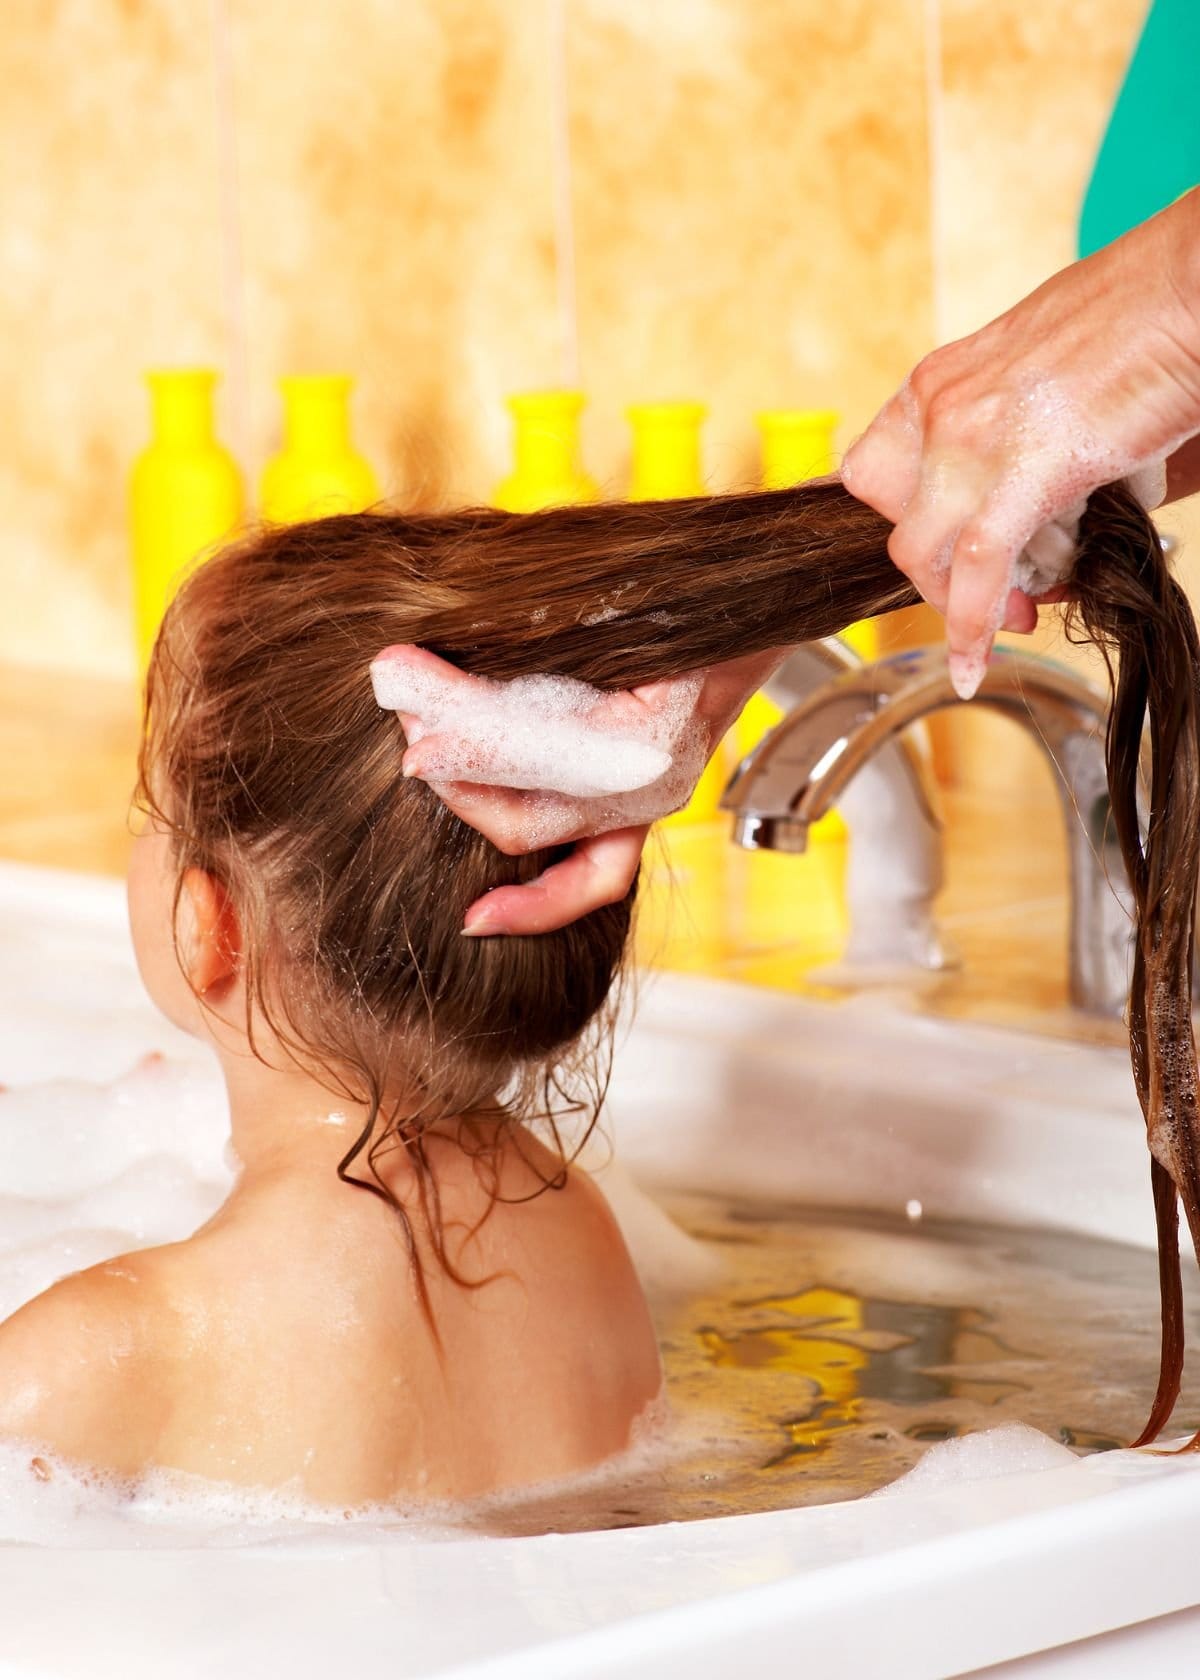 What Shampoo for Kids Will Help Dry Scalp?